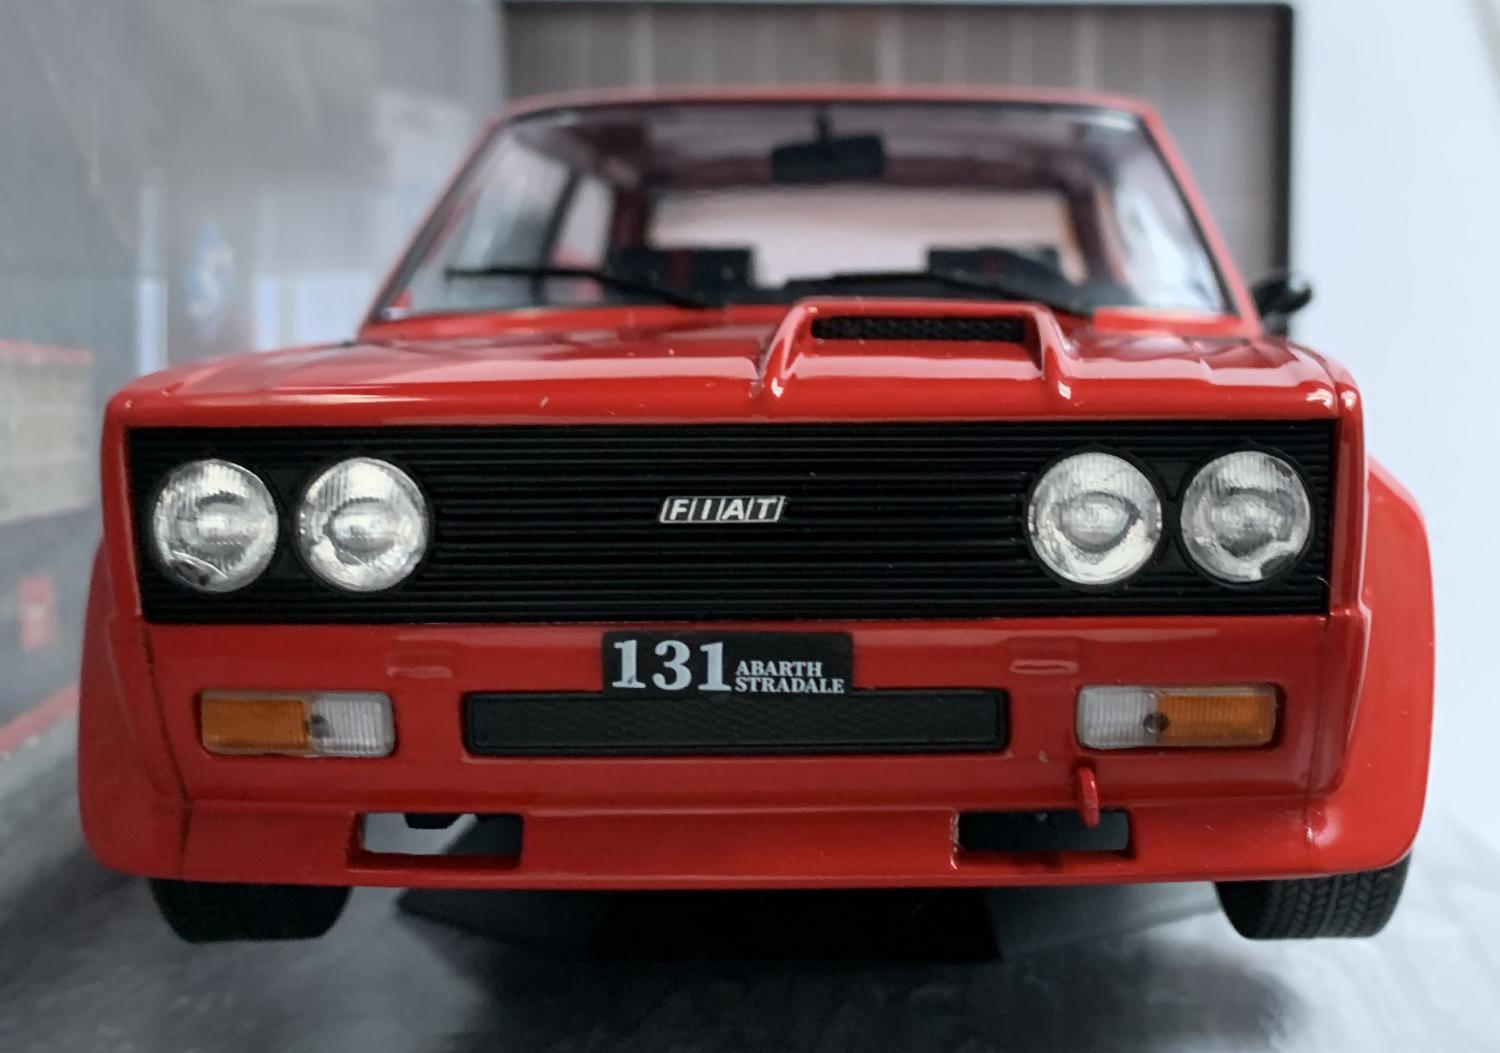 Fiat 131 Abarth 1980 in red 1:18 scale model from Solido